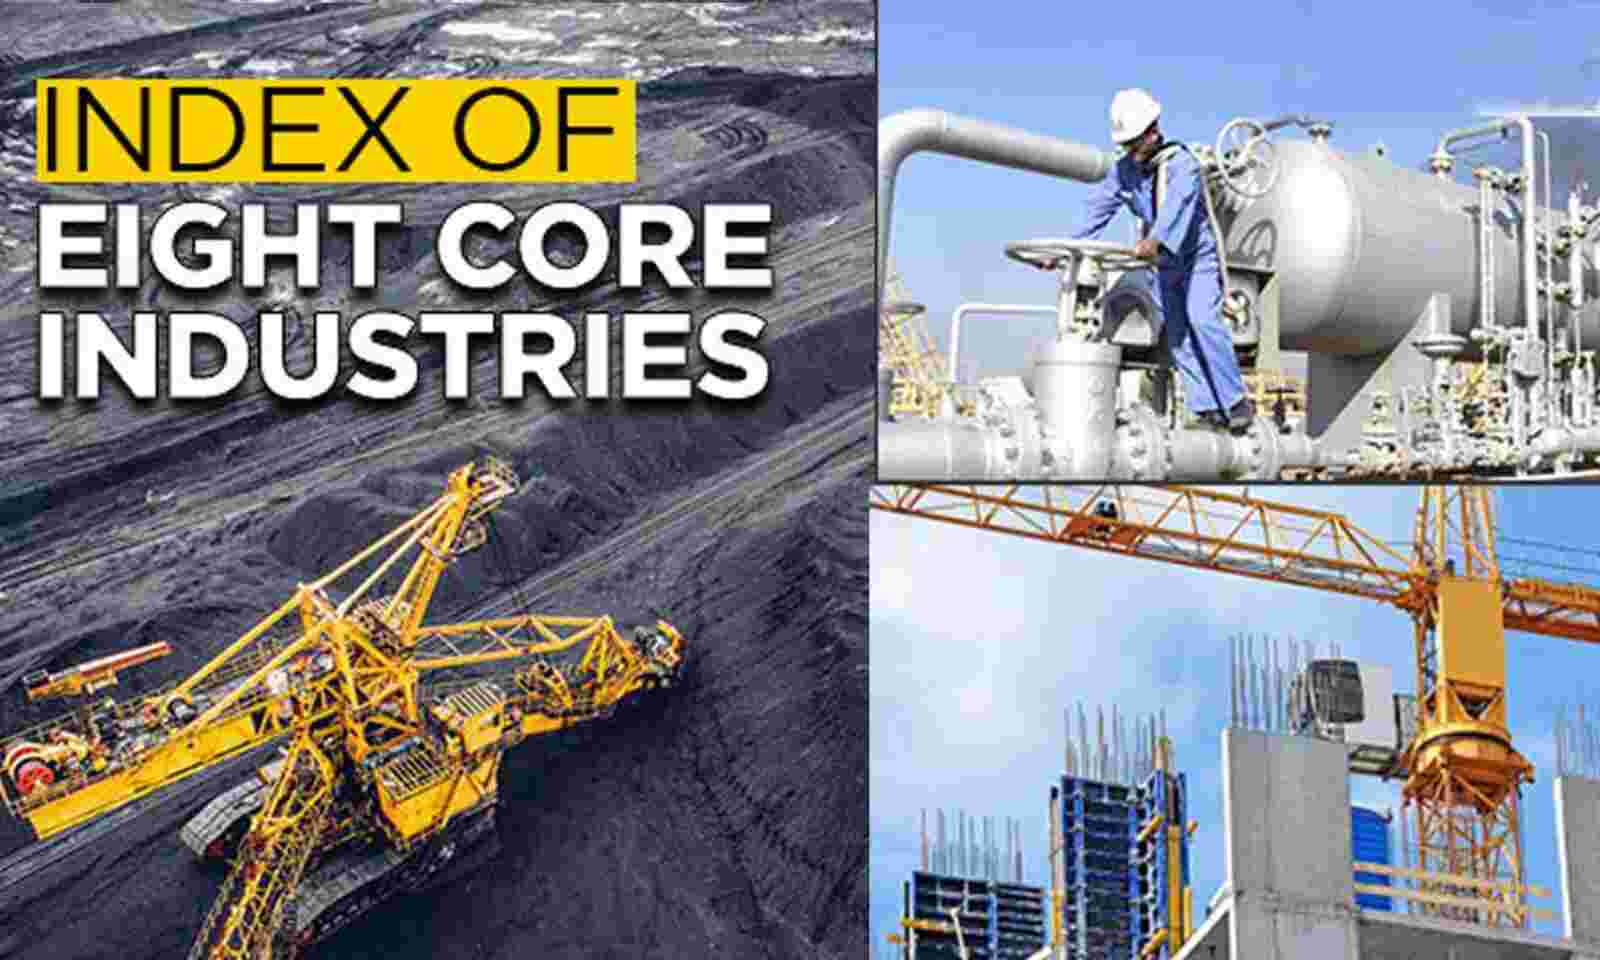 Index Of Eight Core Industries Increases By 5.4 Per Cent_30.1